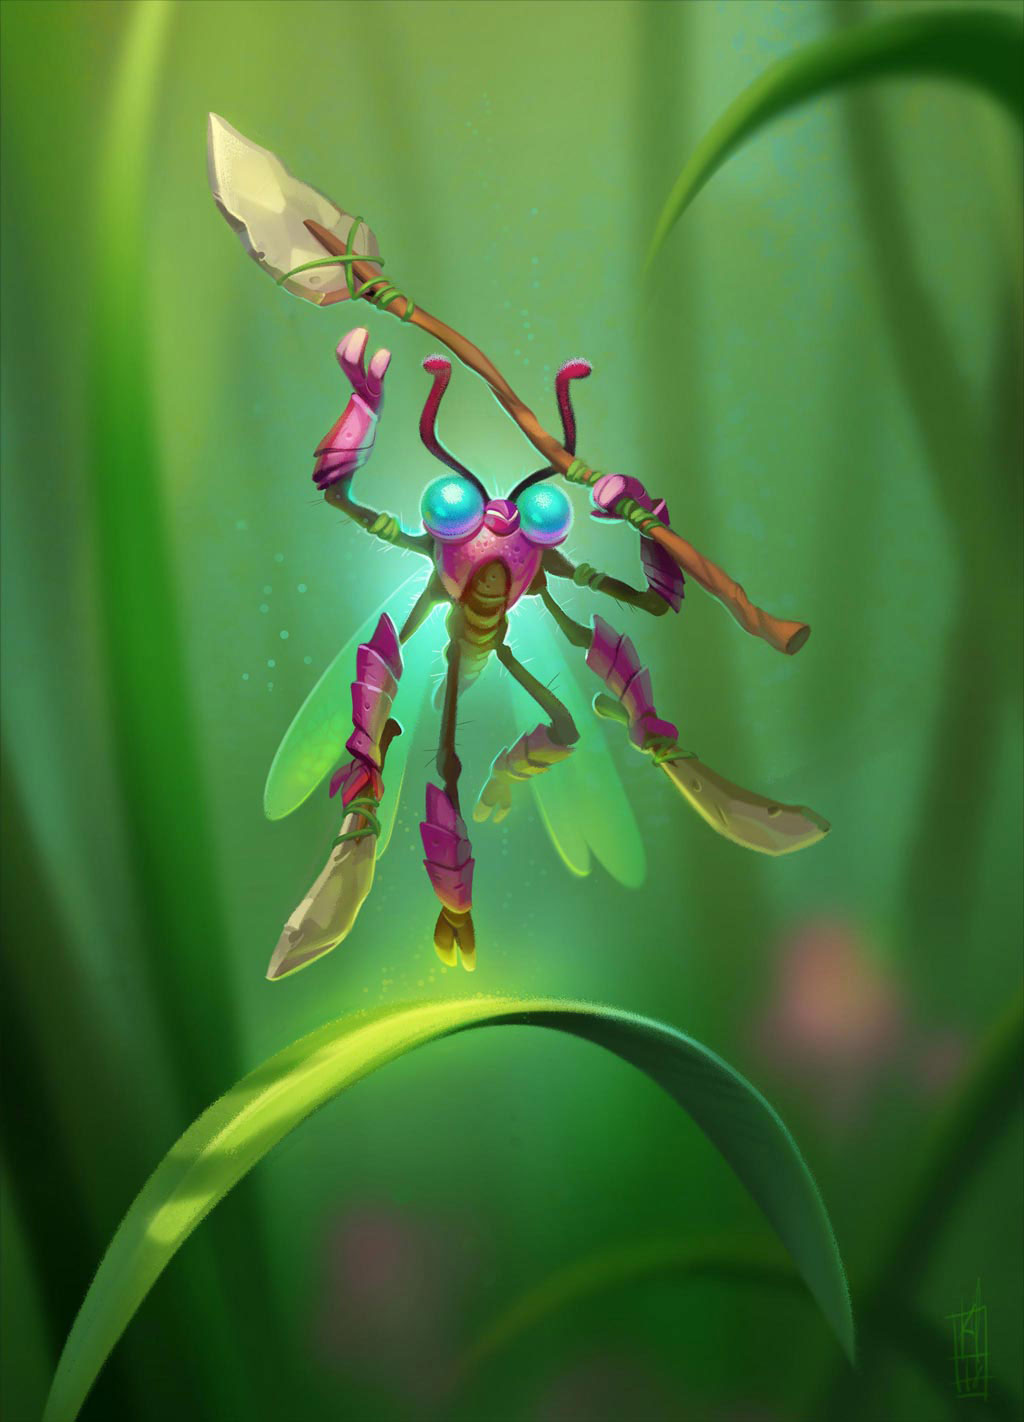 Insect Warrior - character design